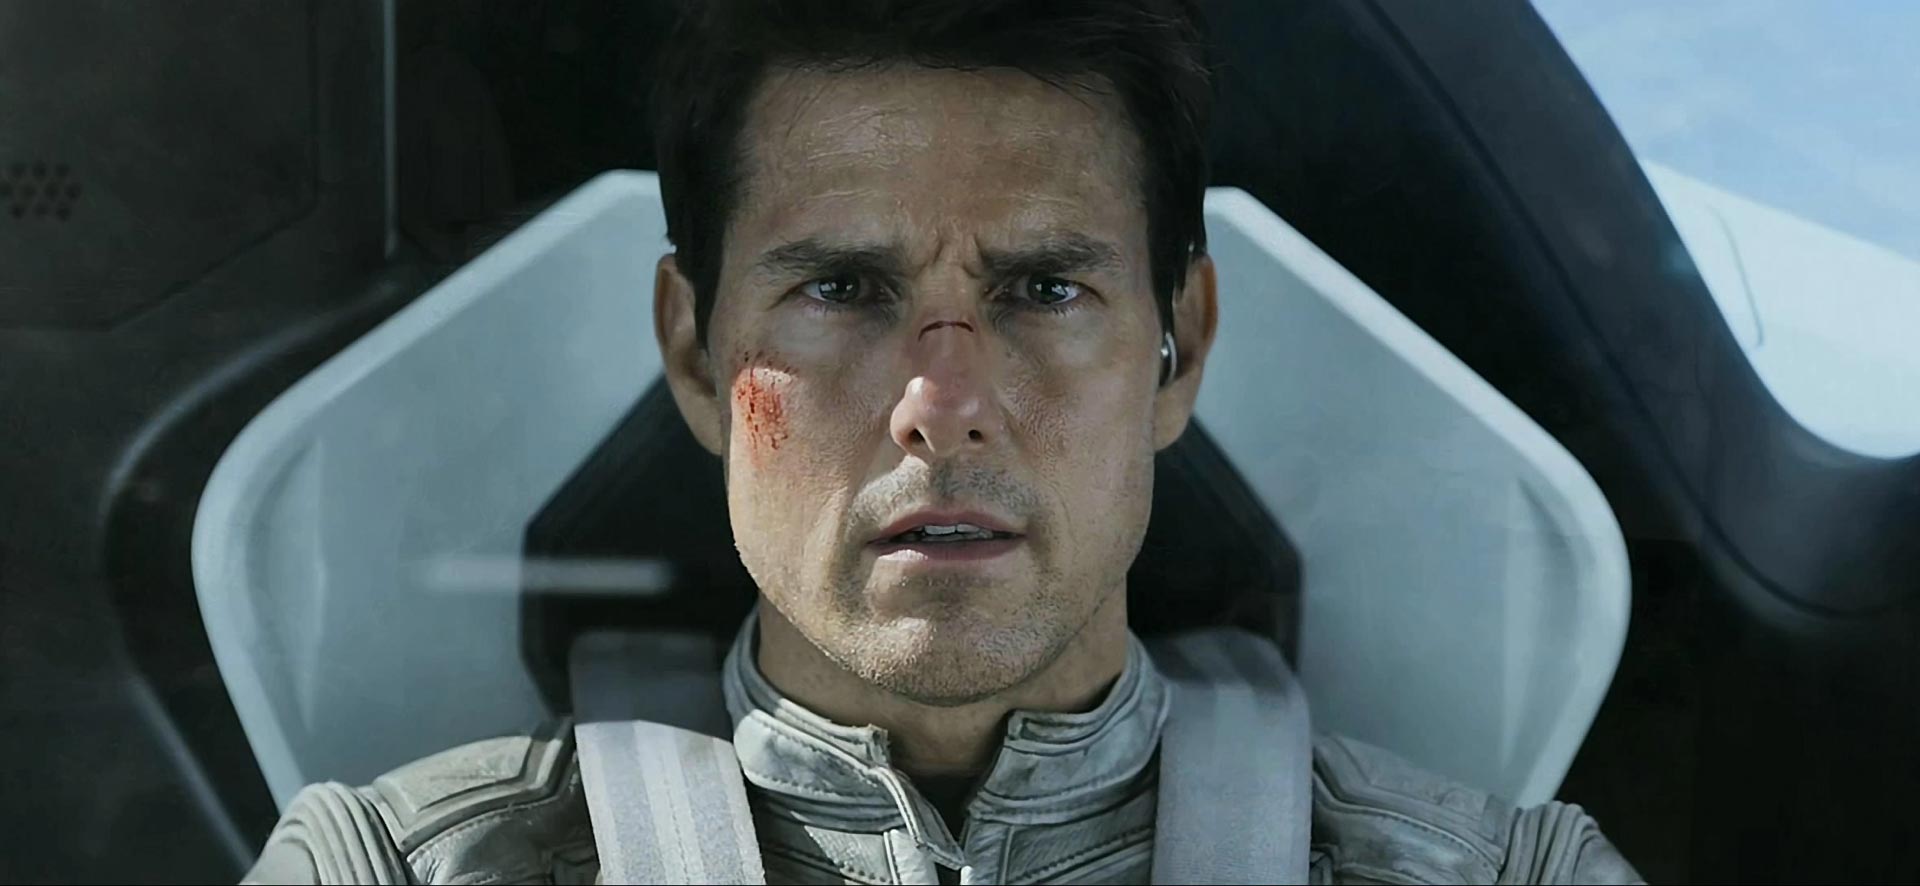 tom cruise in the space